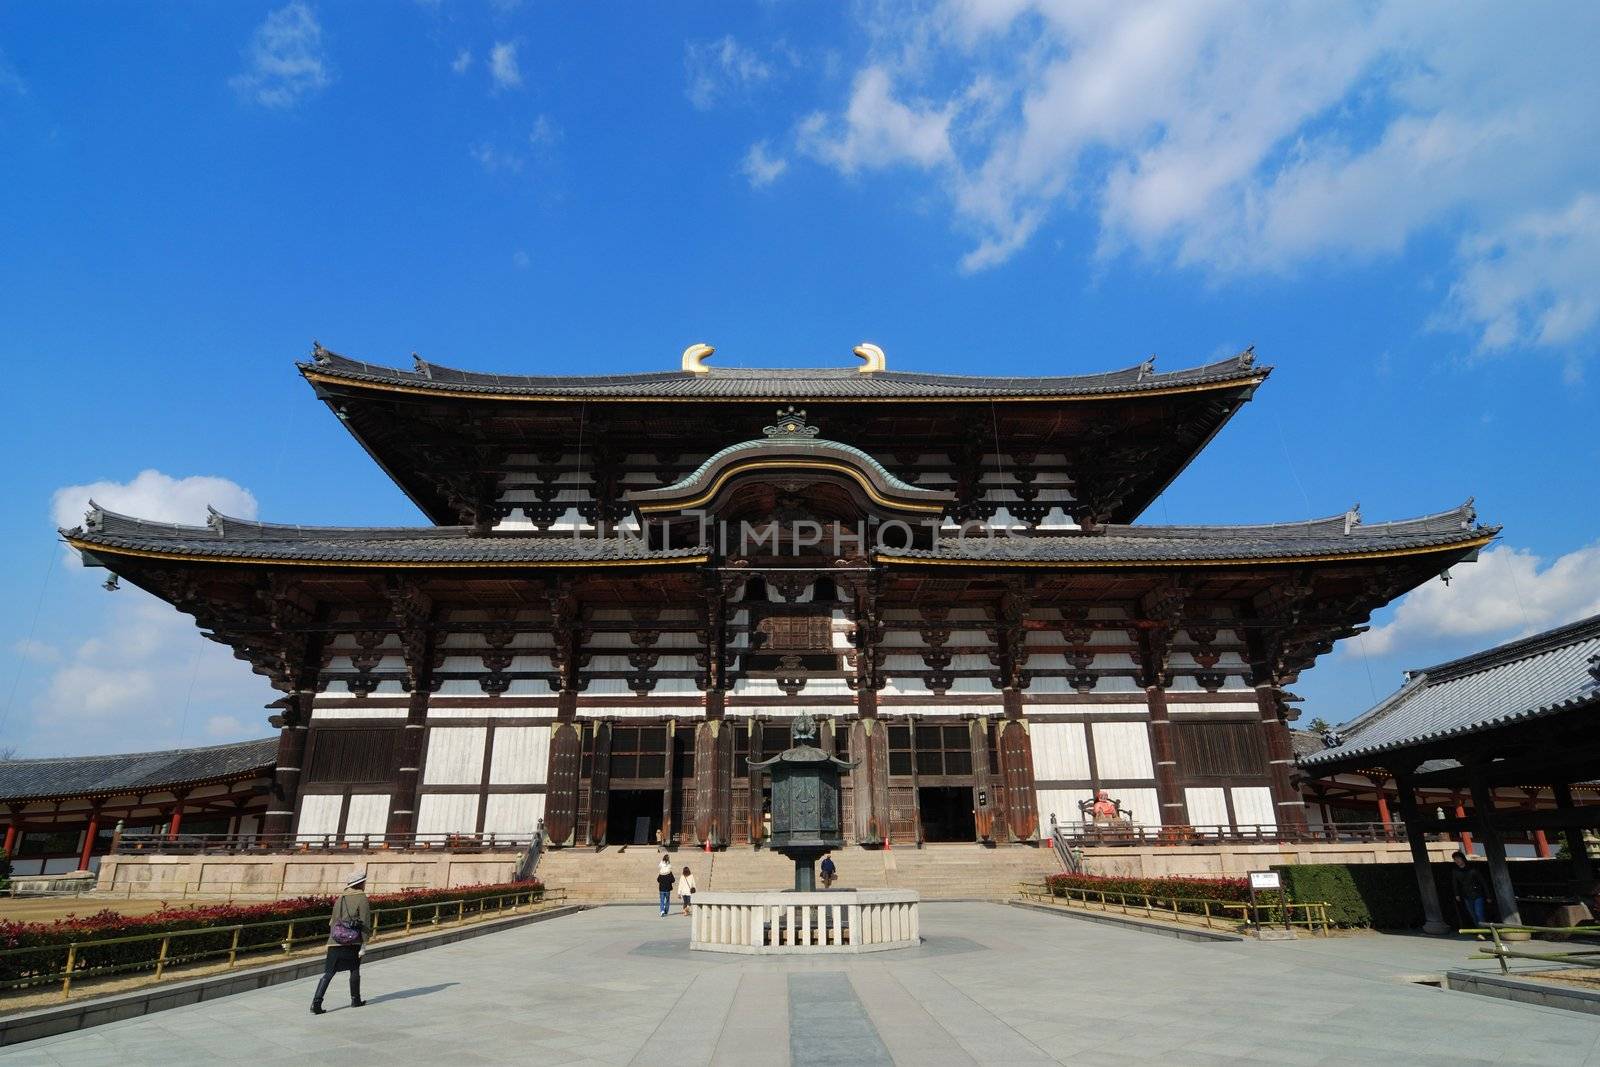 the world biggest wooden building - Todai-ji Temple in Nara, Japan with walking tourists, this building is 49 meters in height and is well-known as the Great Buddha hall